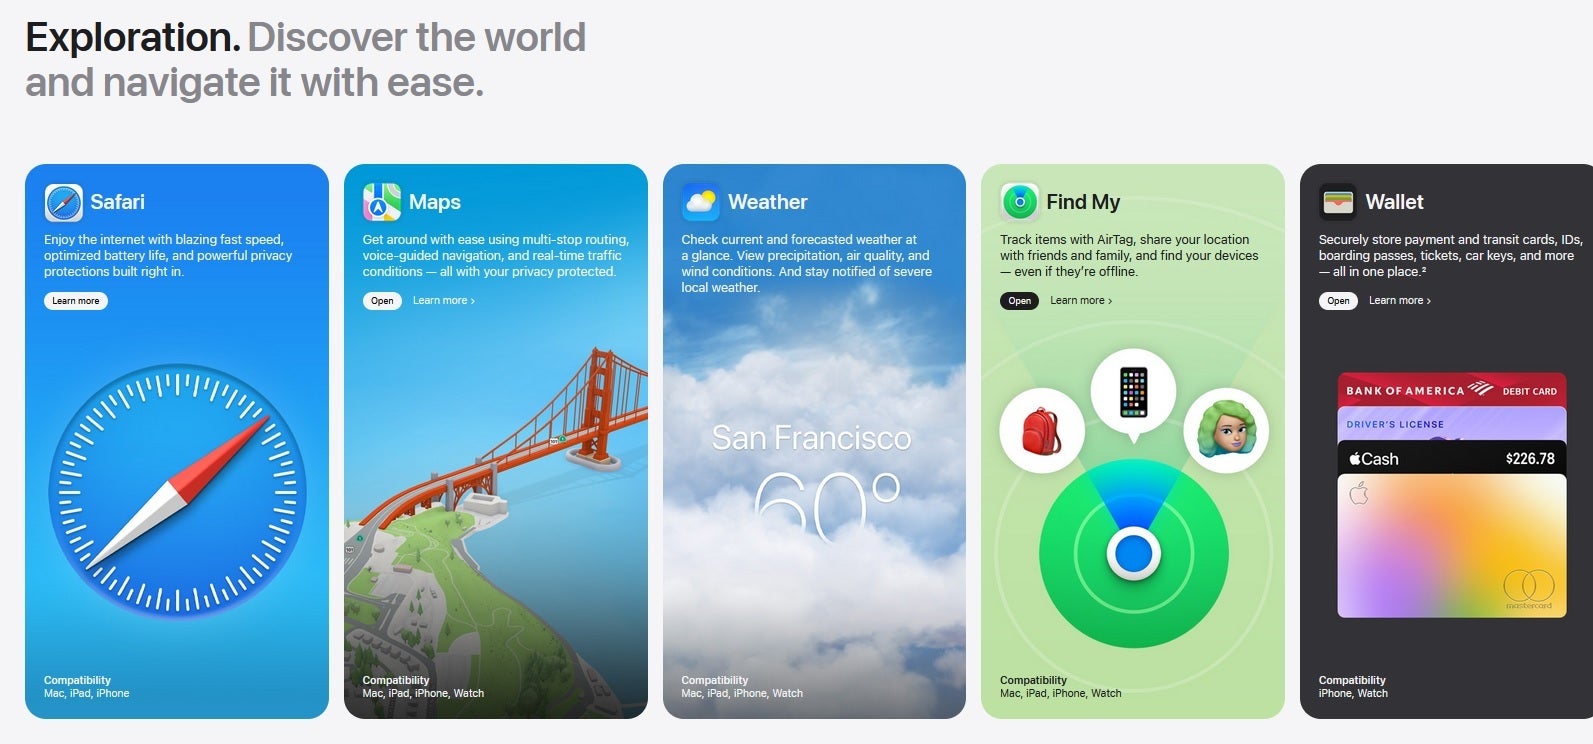 Apple promotes its own exploration apps available in the App Store - Apple creates a new website to promote its own apps